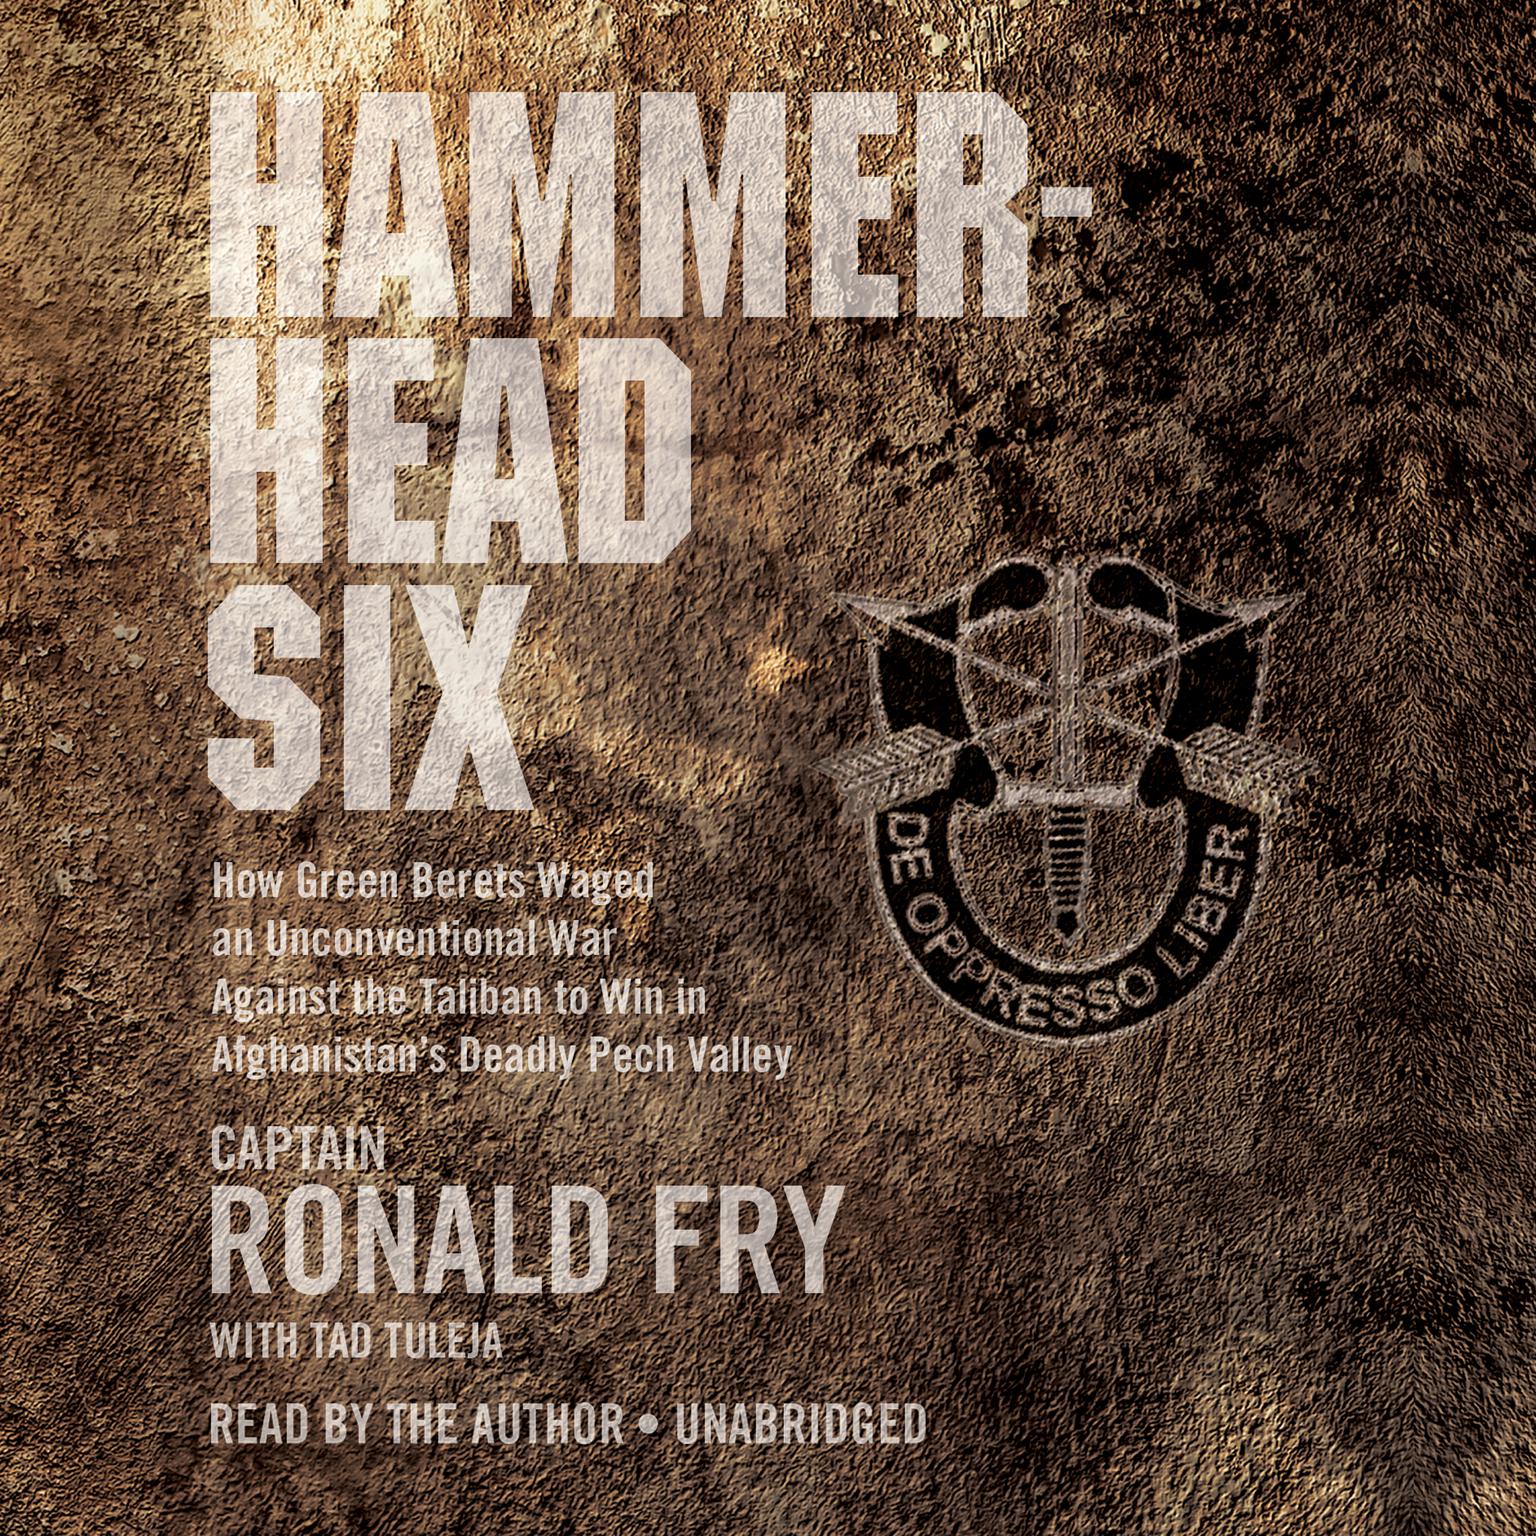 Hammerhead Six: How Green Berets Waged an Unconventional War Against the Taliban to Win in Afghanistans Deadly Pech Valley Audiobook, by Ronald Fry